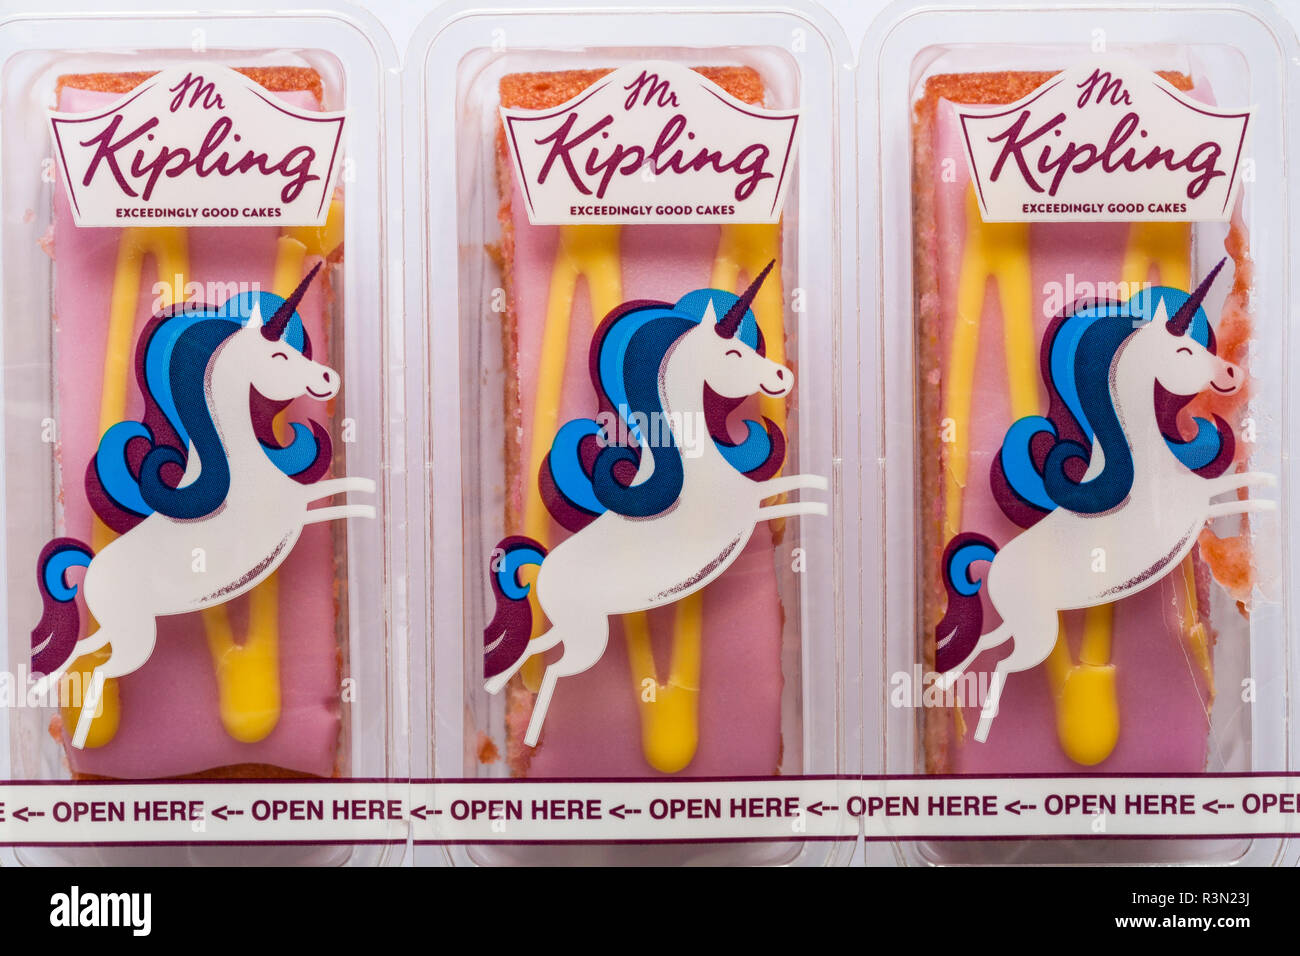 Pack of Mr Kipling Unicorn Slices exceedingly good cakes - individually wrapped, three 3 Stock Photo